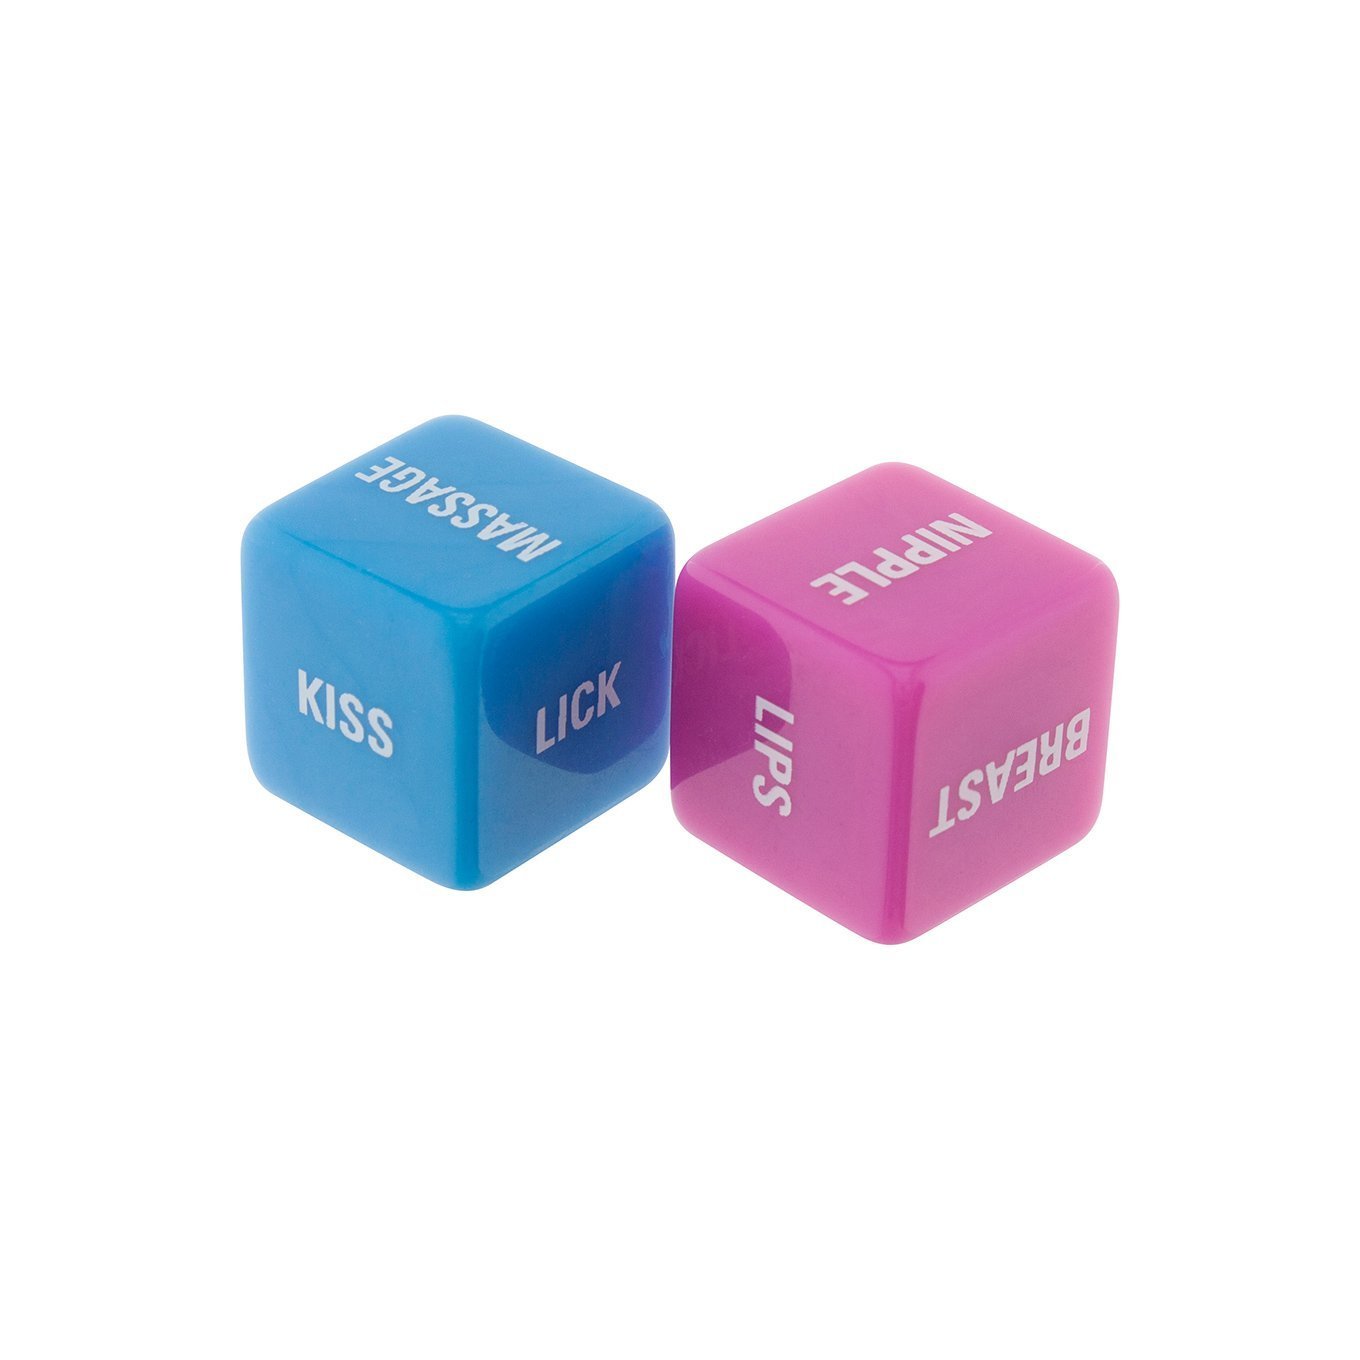 ToyJoy - Lovers Dice (Pink/Blue) -  Games  Durio.sg